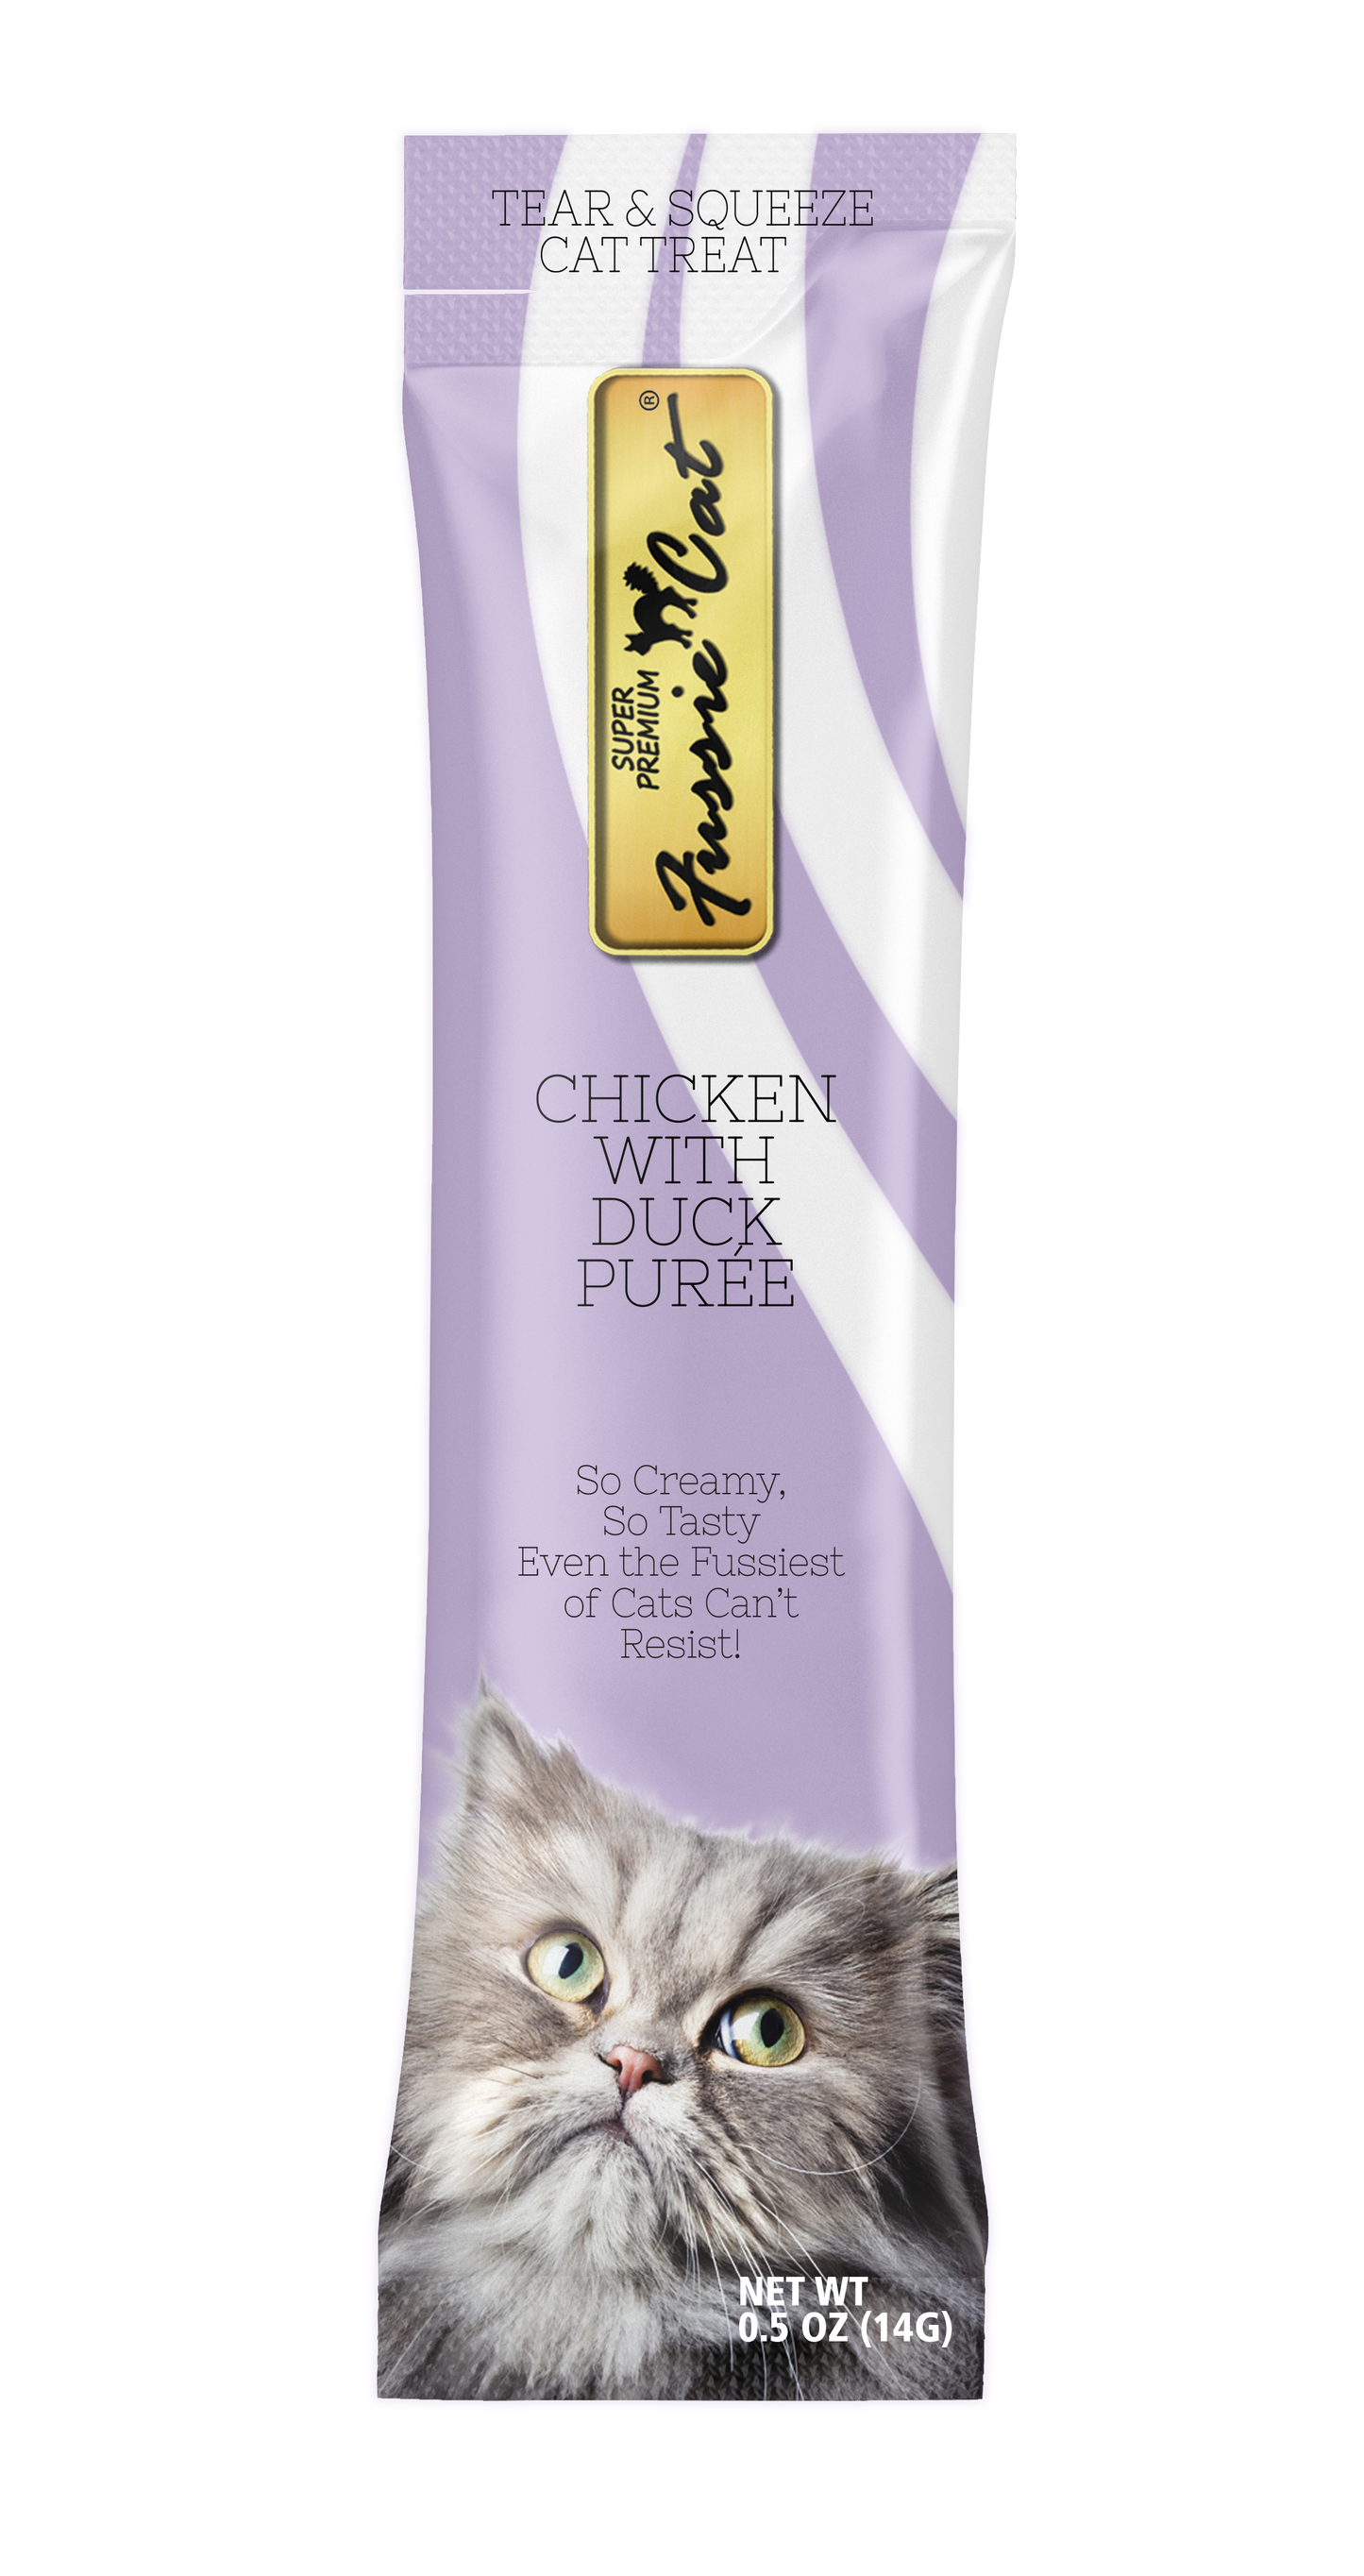 Fussie Cat Chicken With Duck Purée 0.5-oz, 4-Pack, Cat Treat